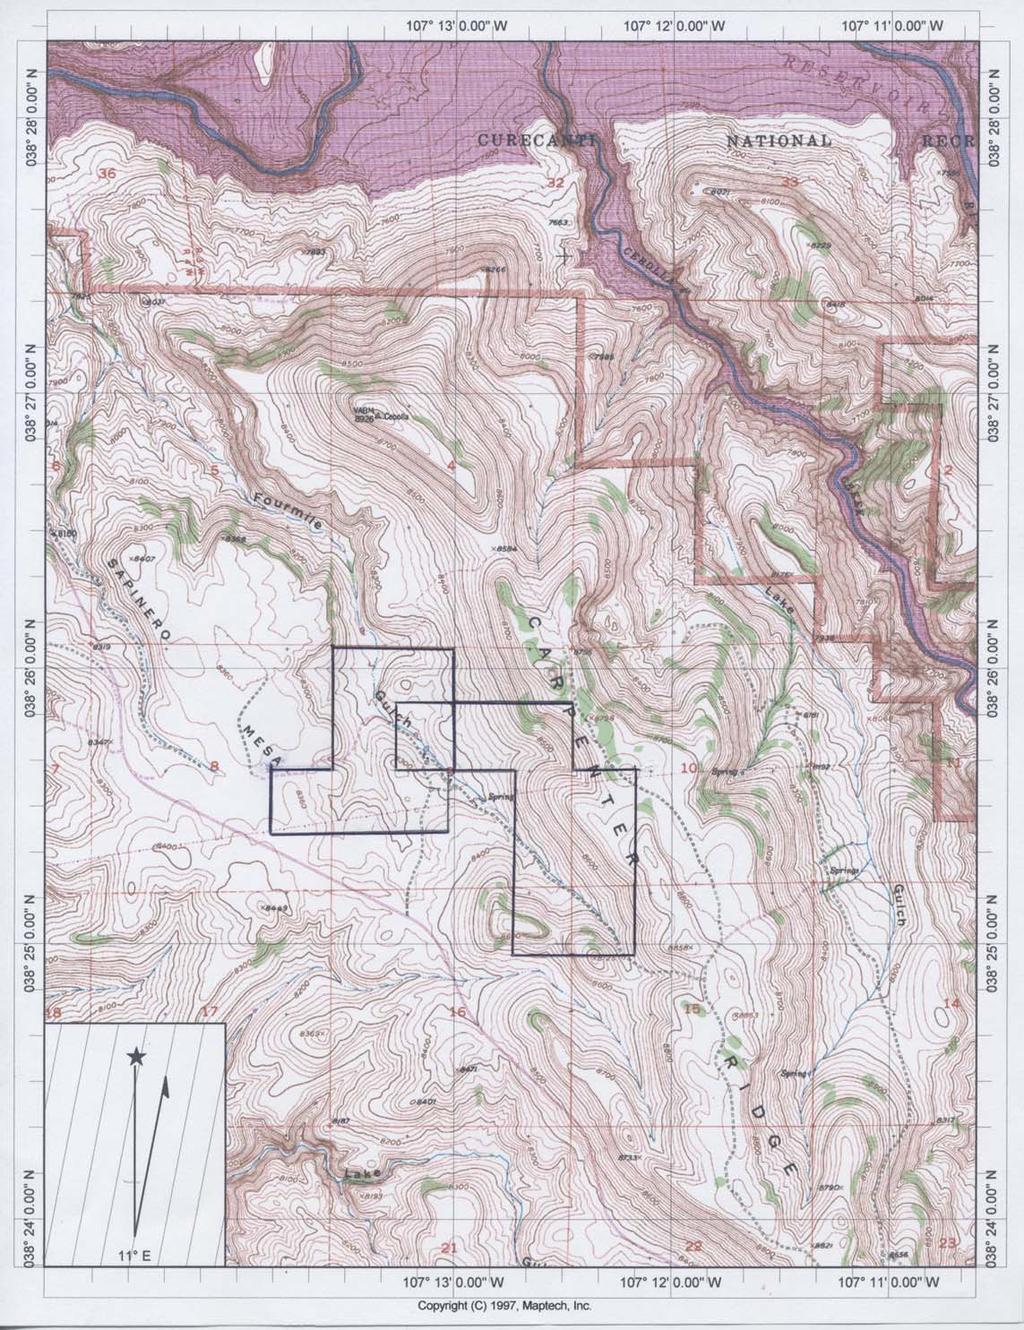 CARPENTER RIDGE RANCH County Road 26 OUT 80 acrehome site Note: This map is a hand drawn map showing the approximate location of the property boundaries and